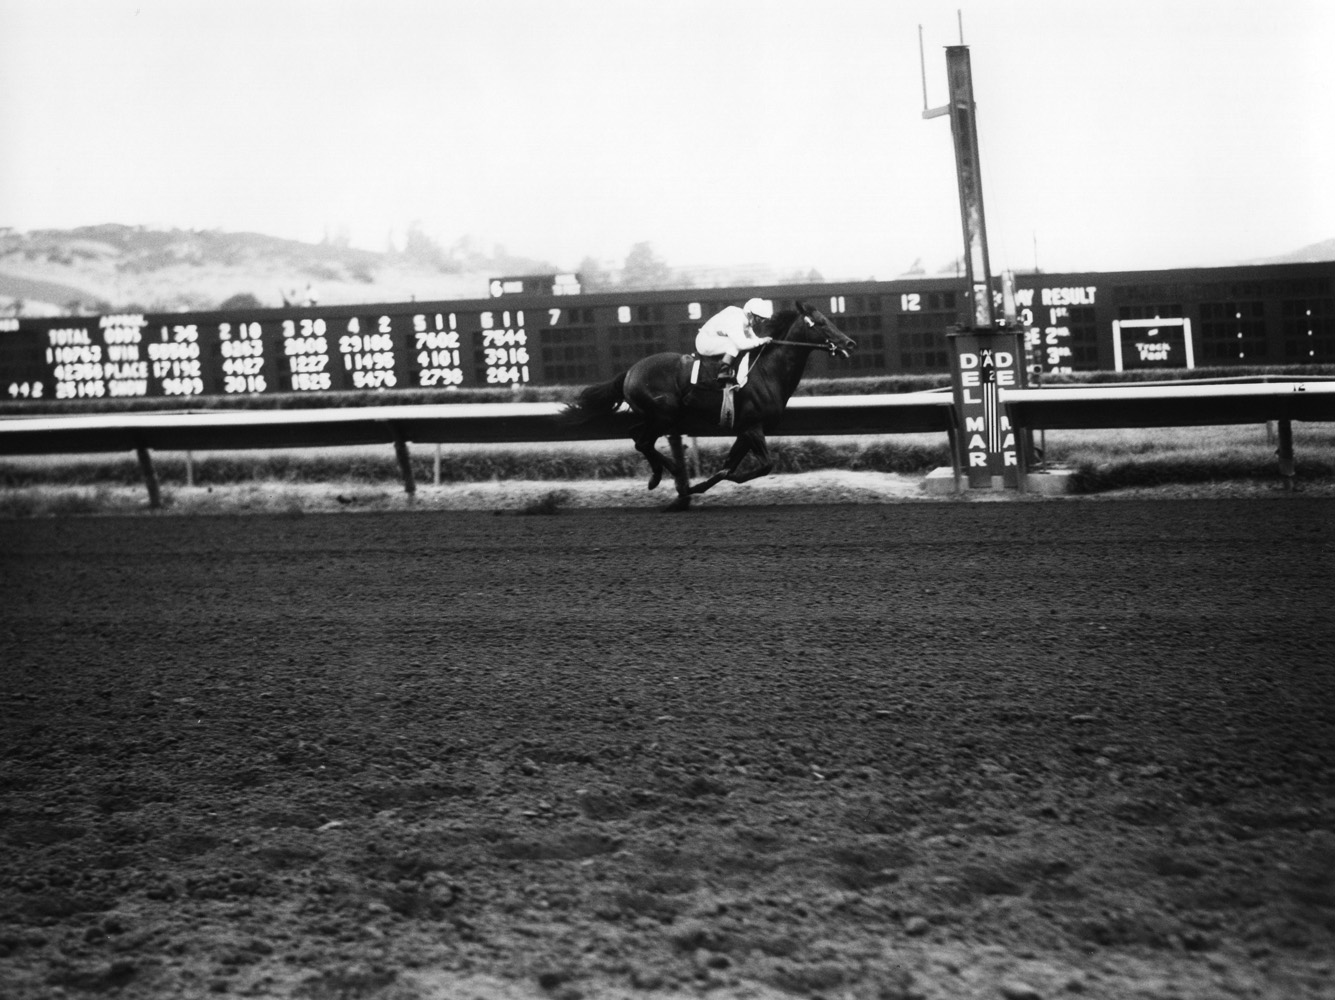 Ack Ack (Bill Shoemaker up) racing at Del Mar Thoroughbred Club, September 1970 (Del Mar Thoroughbred Club/Museum Collection)